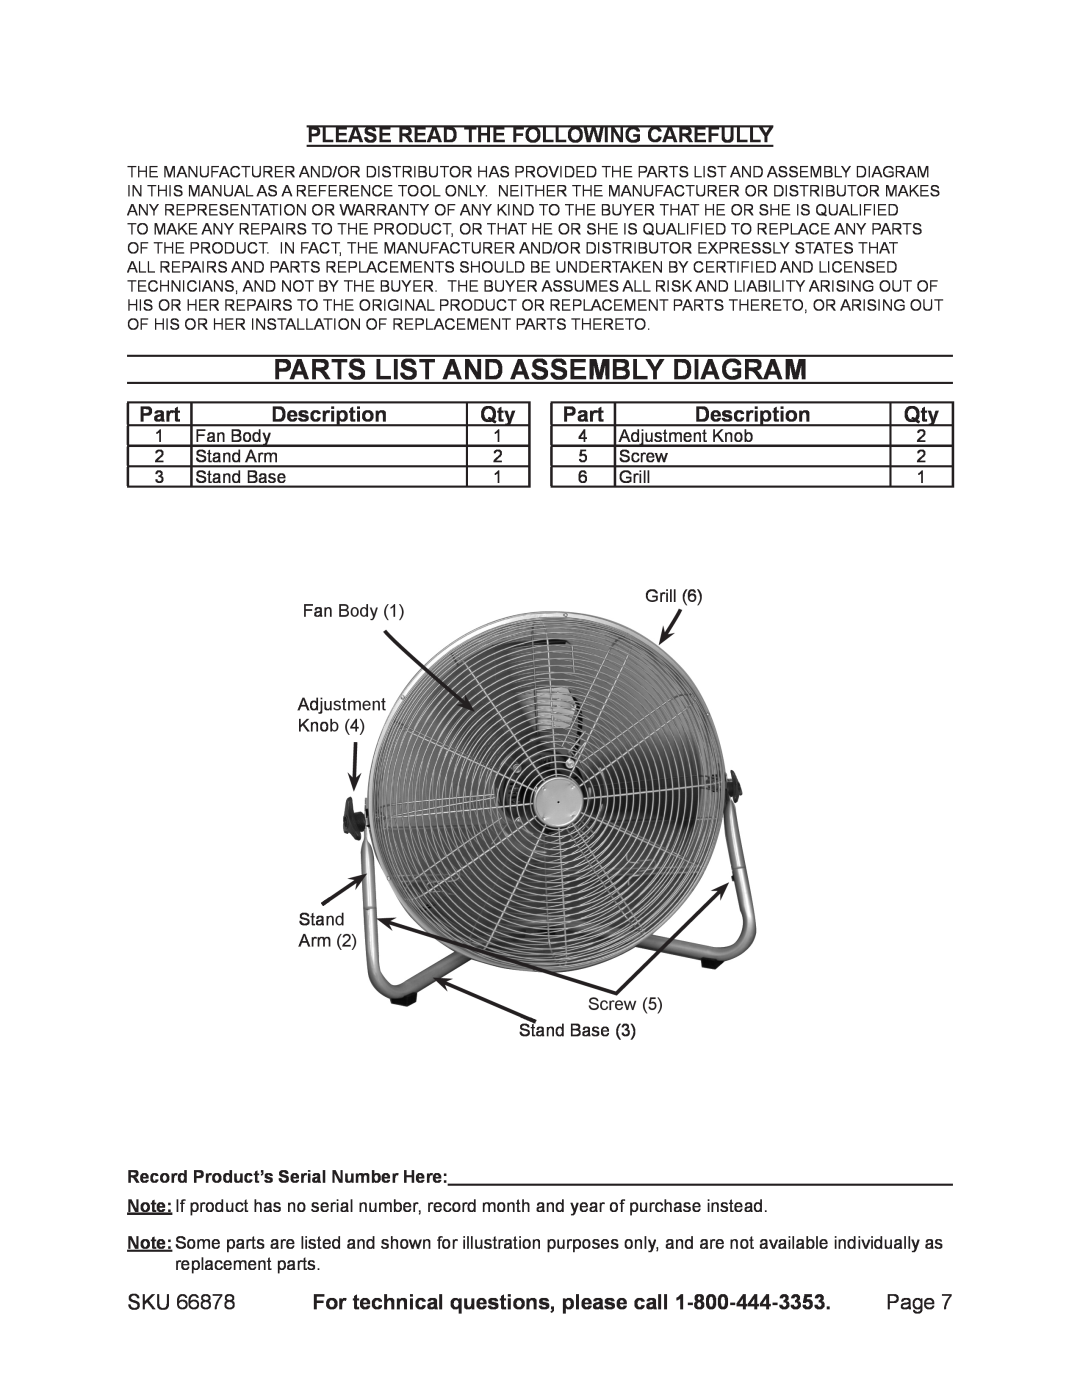 Chicago Electric 66878 manual Parts List And Assembly Diagram, Please Read The Following Carefully, Description 